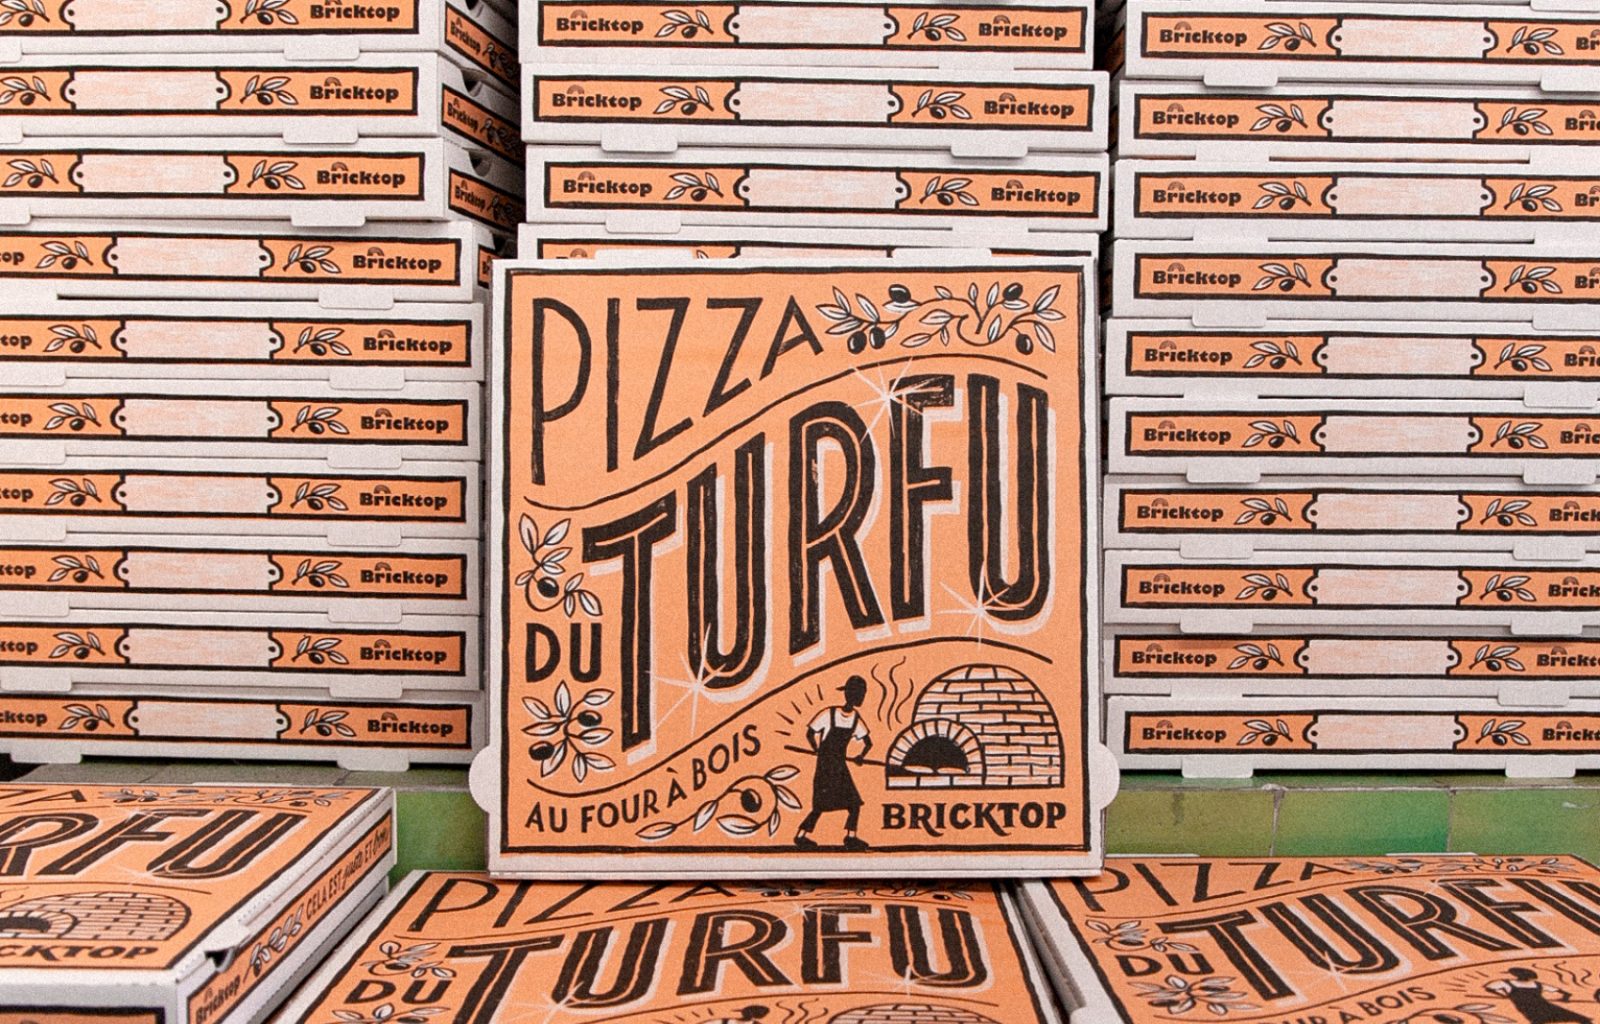 18 Snazzy Pizza Packaging and Branding Designs (Part 1) - Design